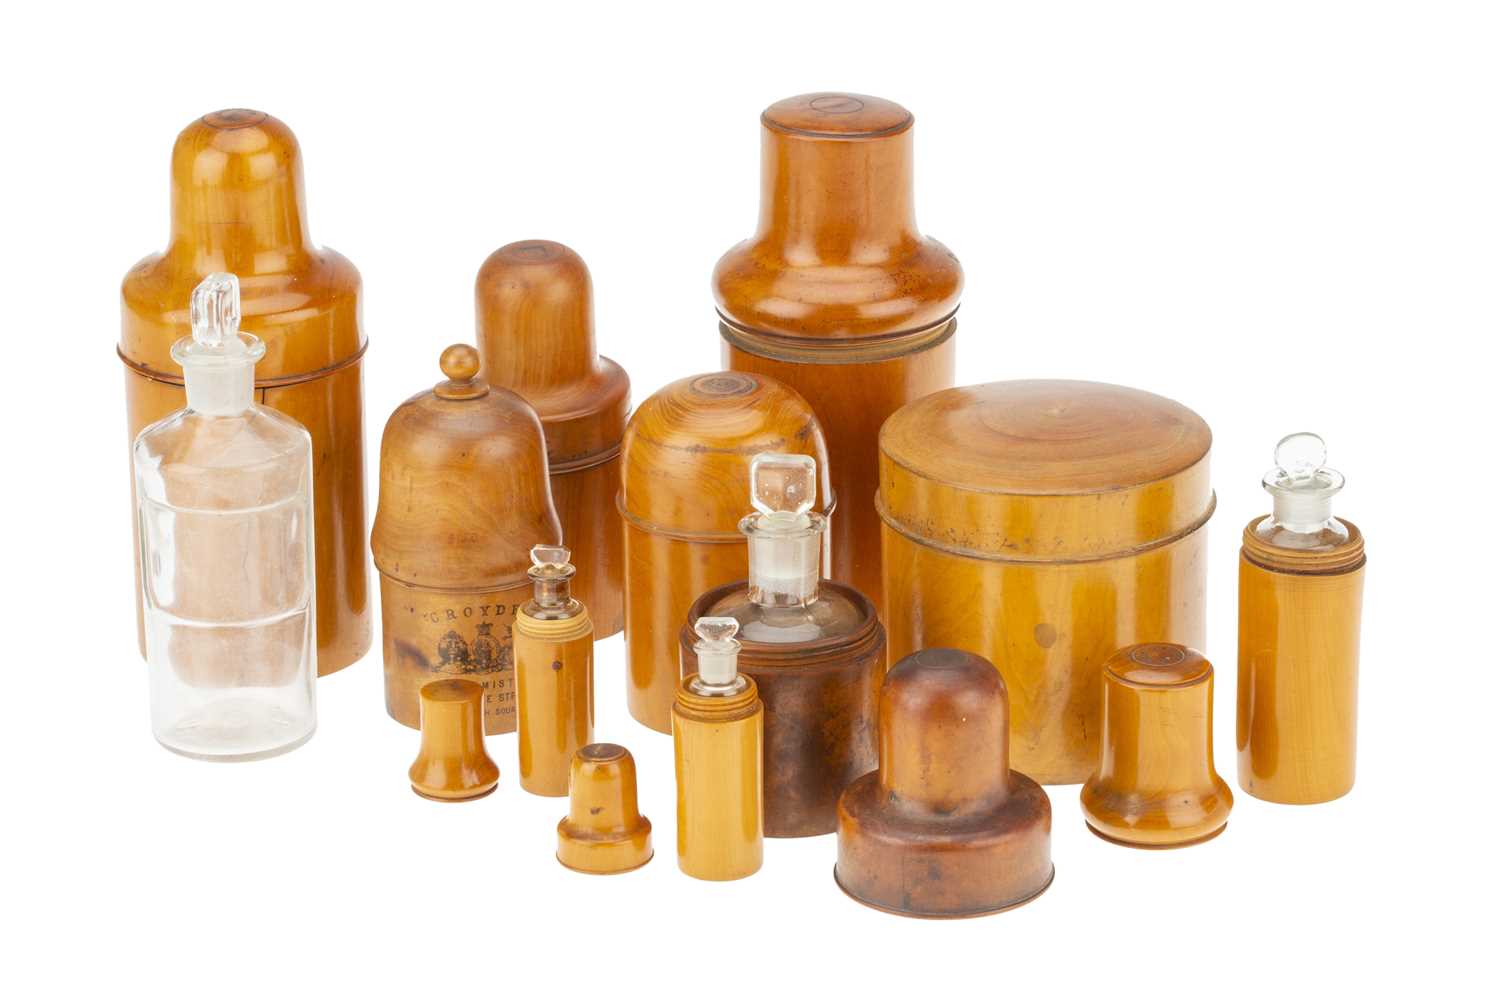 Lot 35 - A Collection of 10 Boxwood Bottle Containers